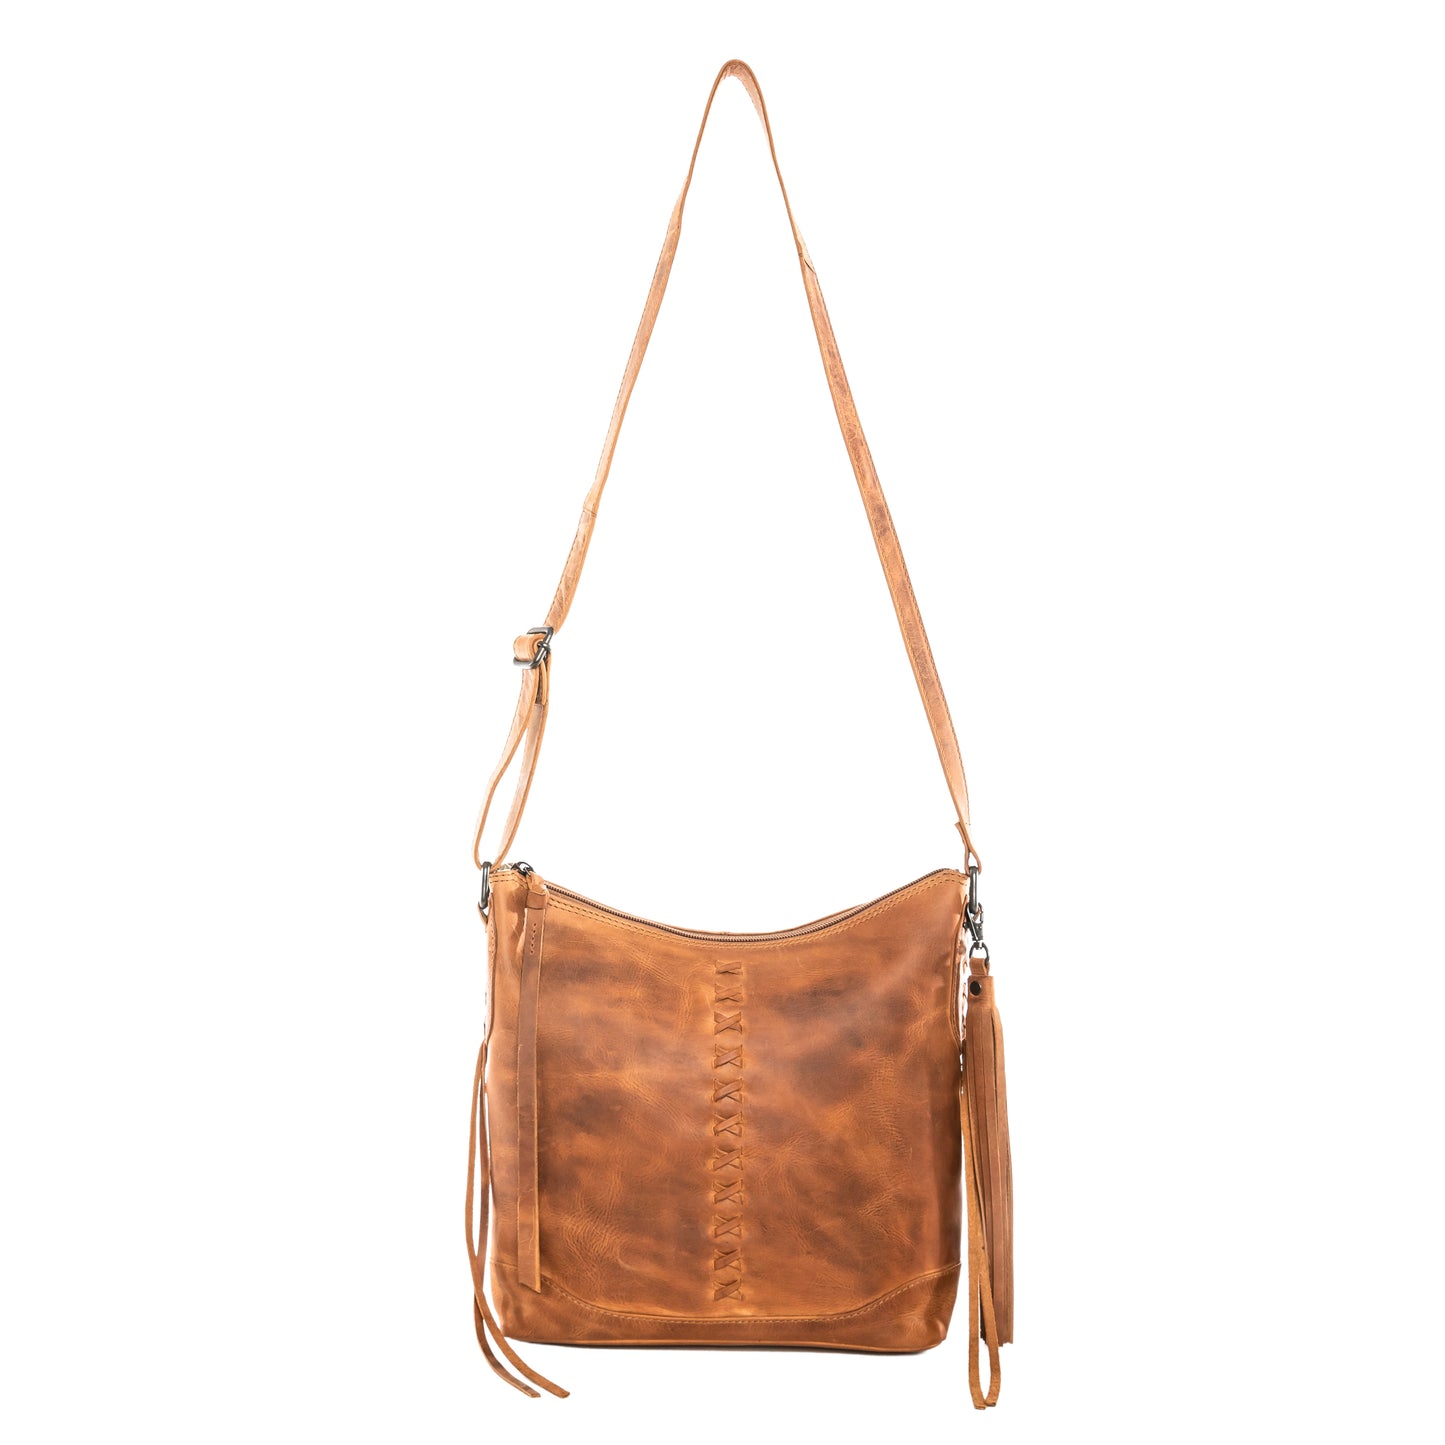 CONCEALED CARRY BLAKE SCOOPED LEATHER CROSSBODY